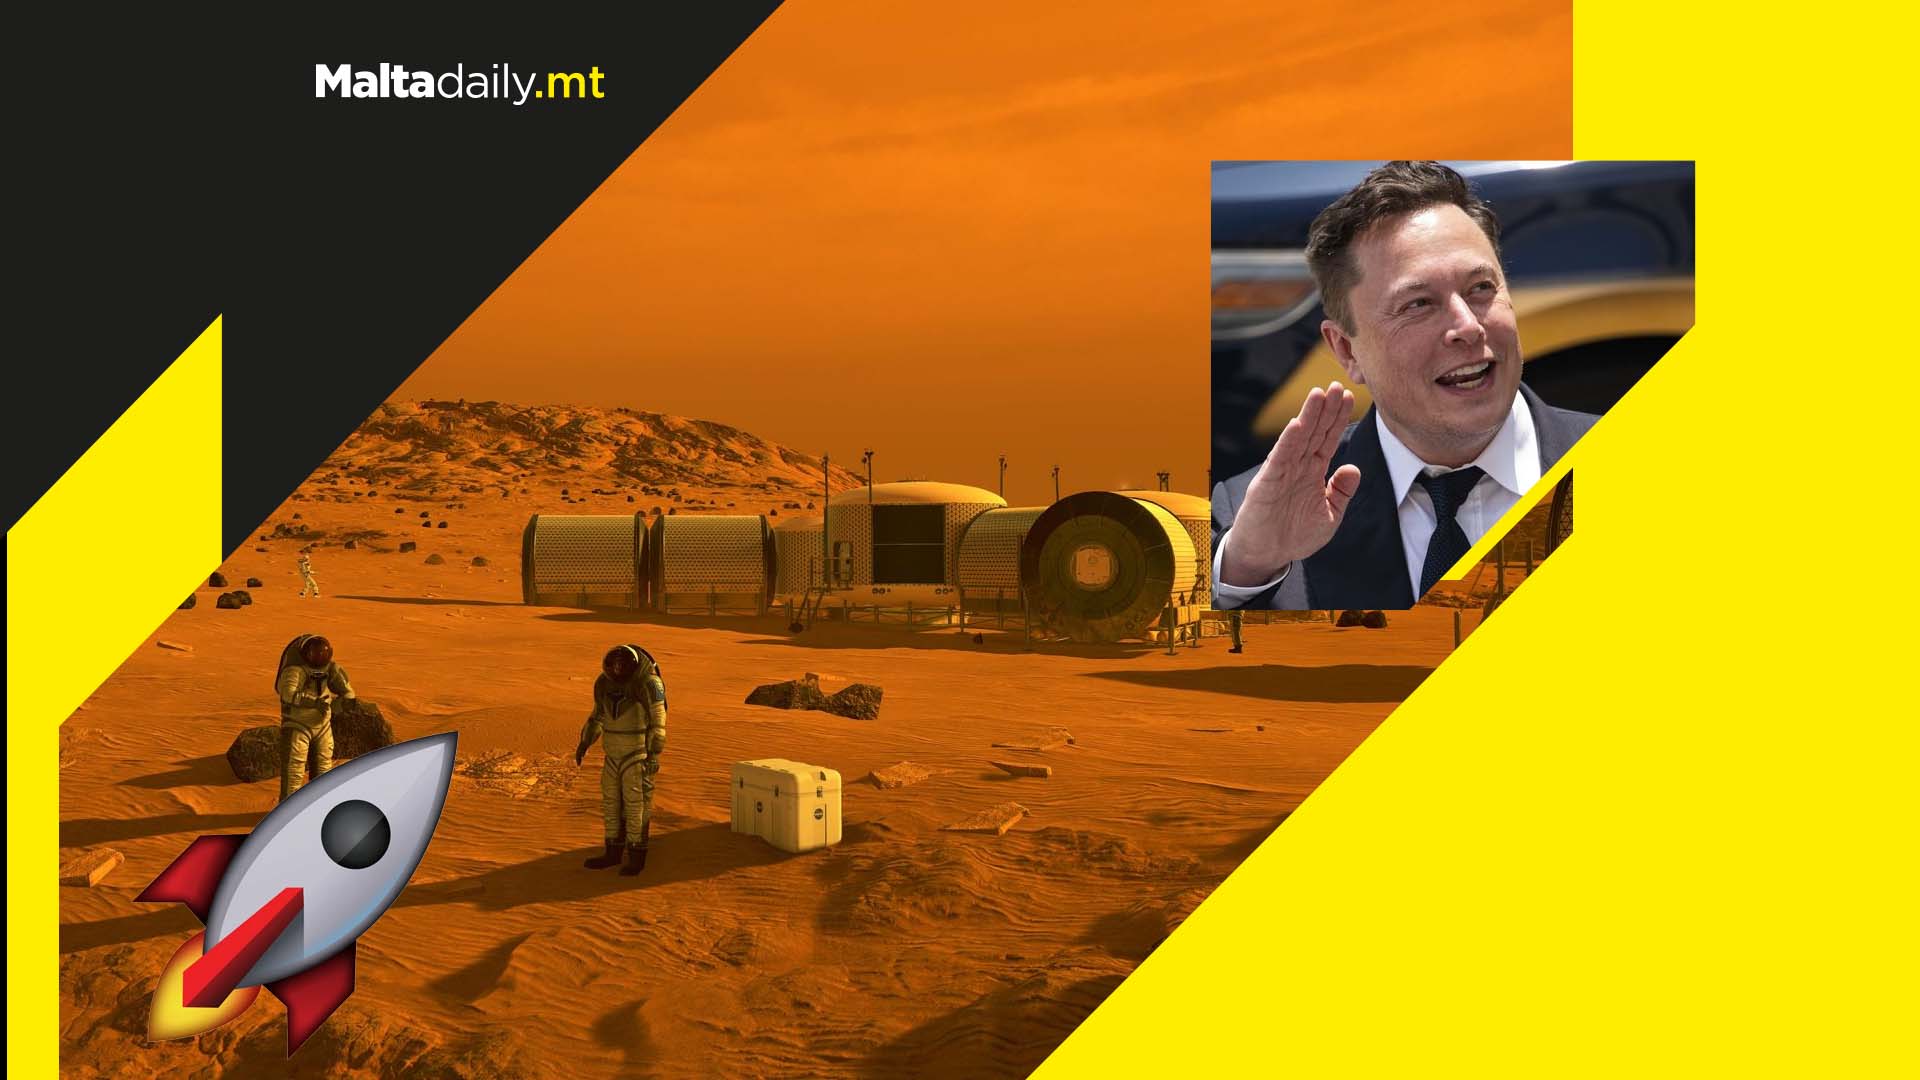 Elon Musk sets the date for when humans will land on Mars